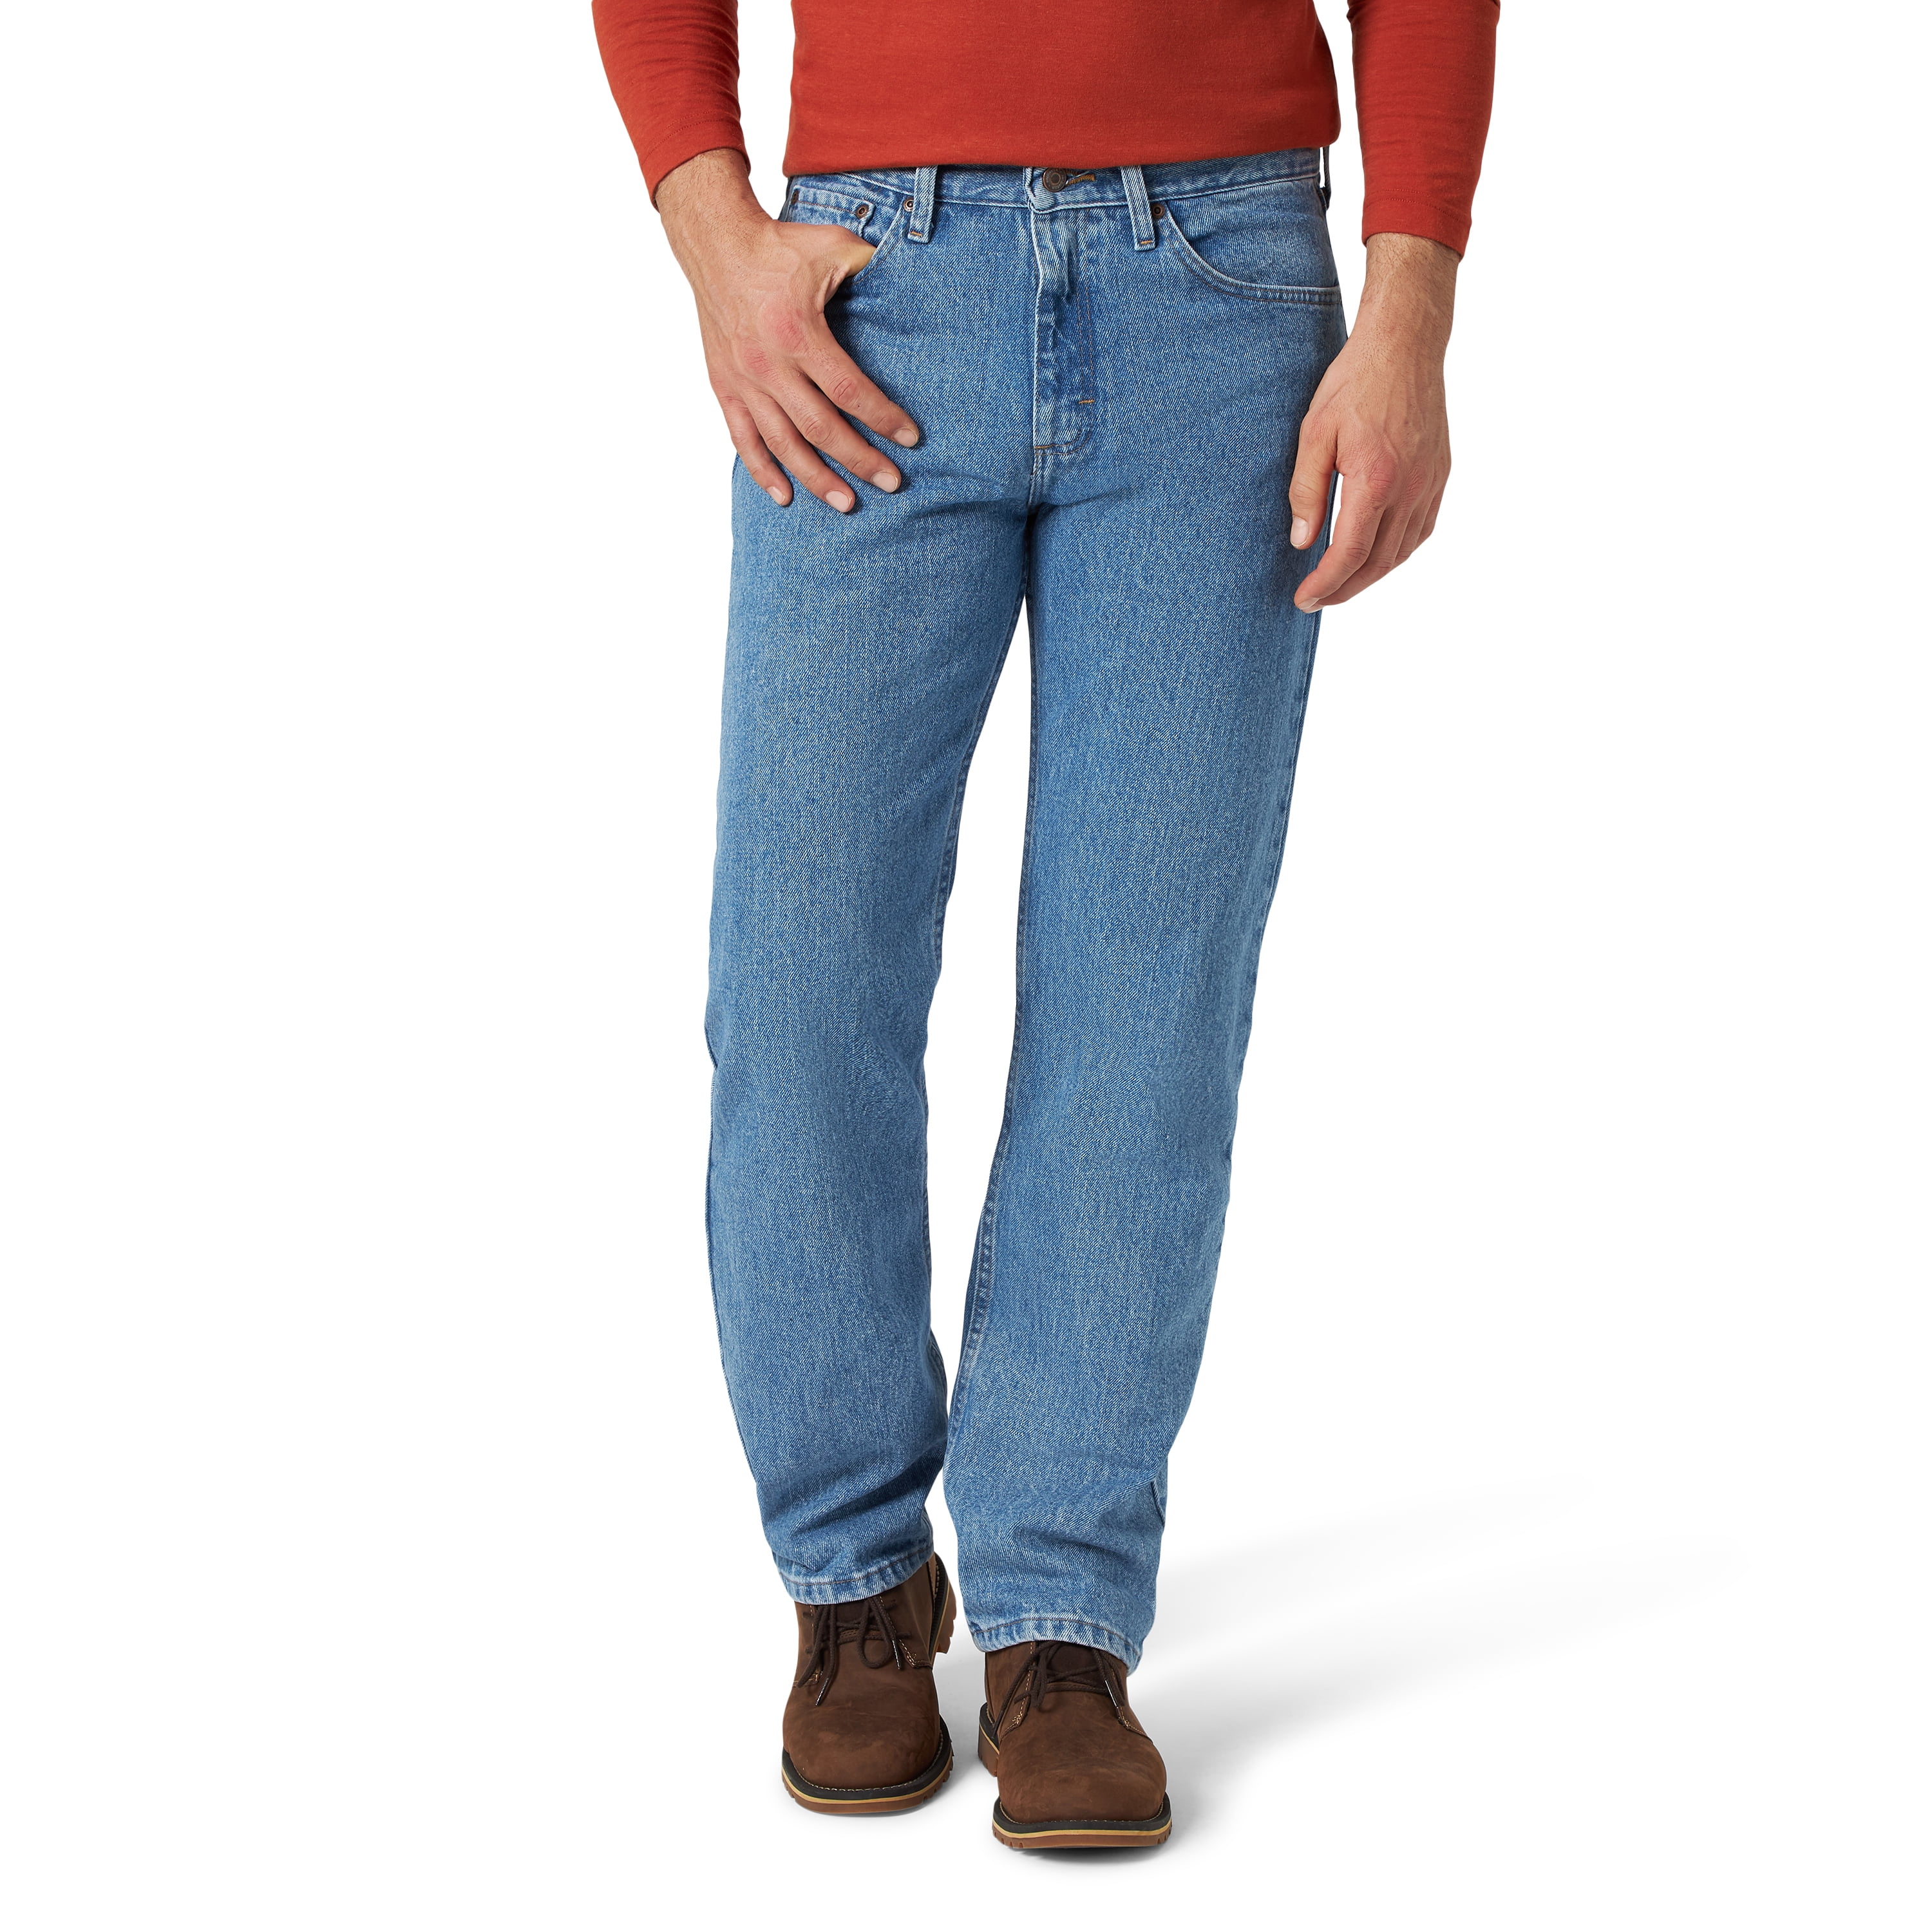 wrangler relaxed fit jeans 46x30